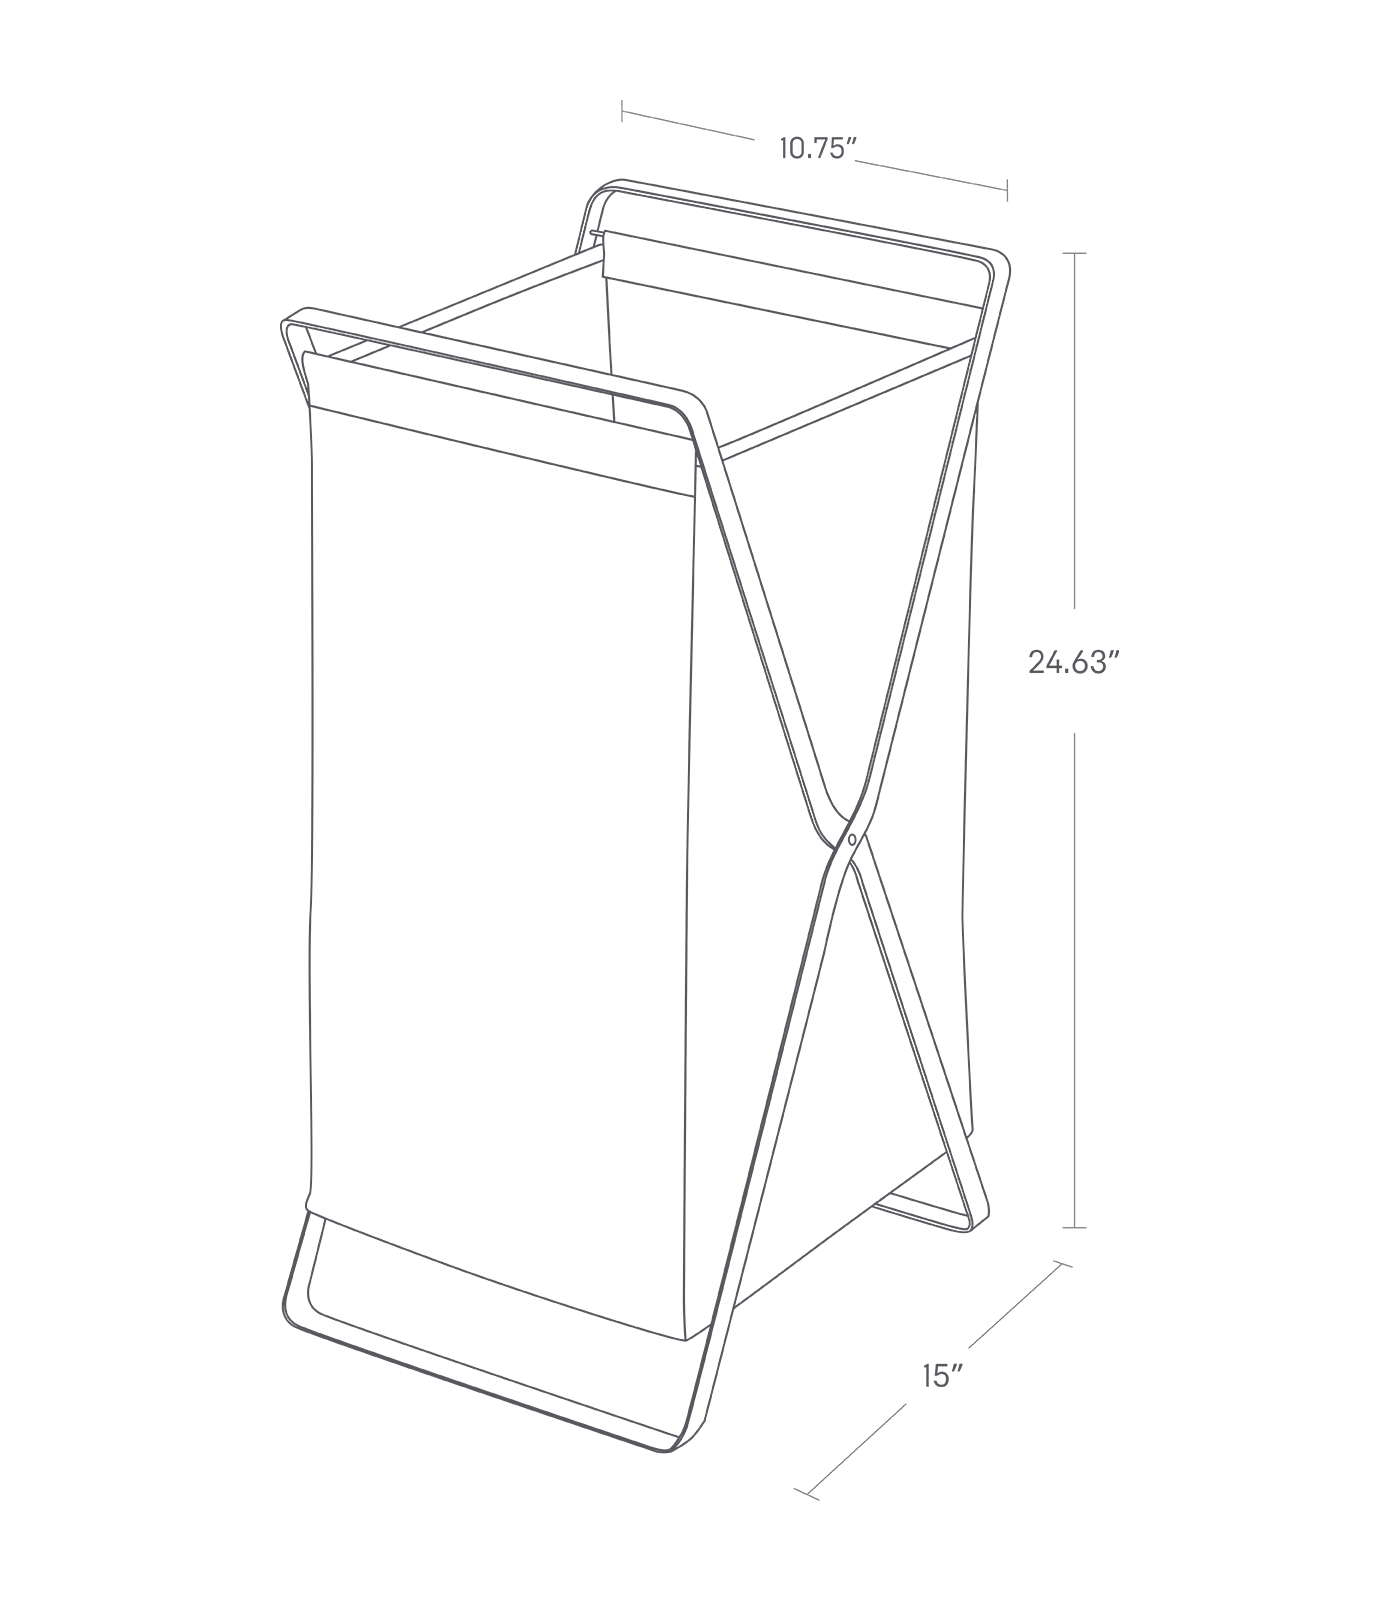 Dimension image for Laundry Hamper on a white background including dimensions  L 14.17 x W 11.81 x H 25.2 inches